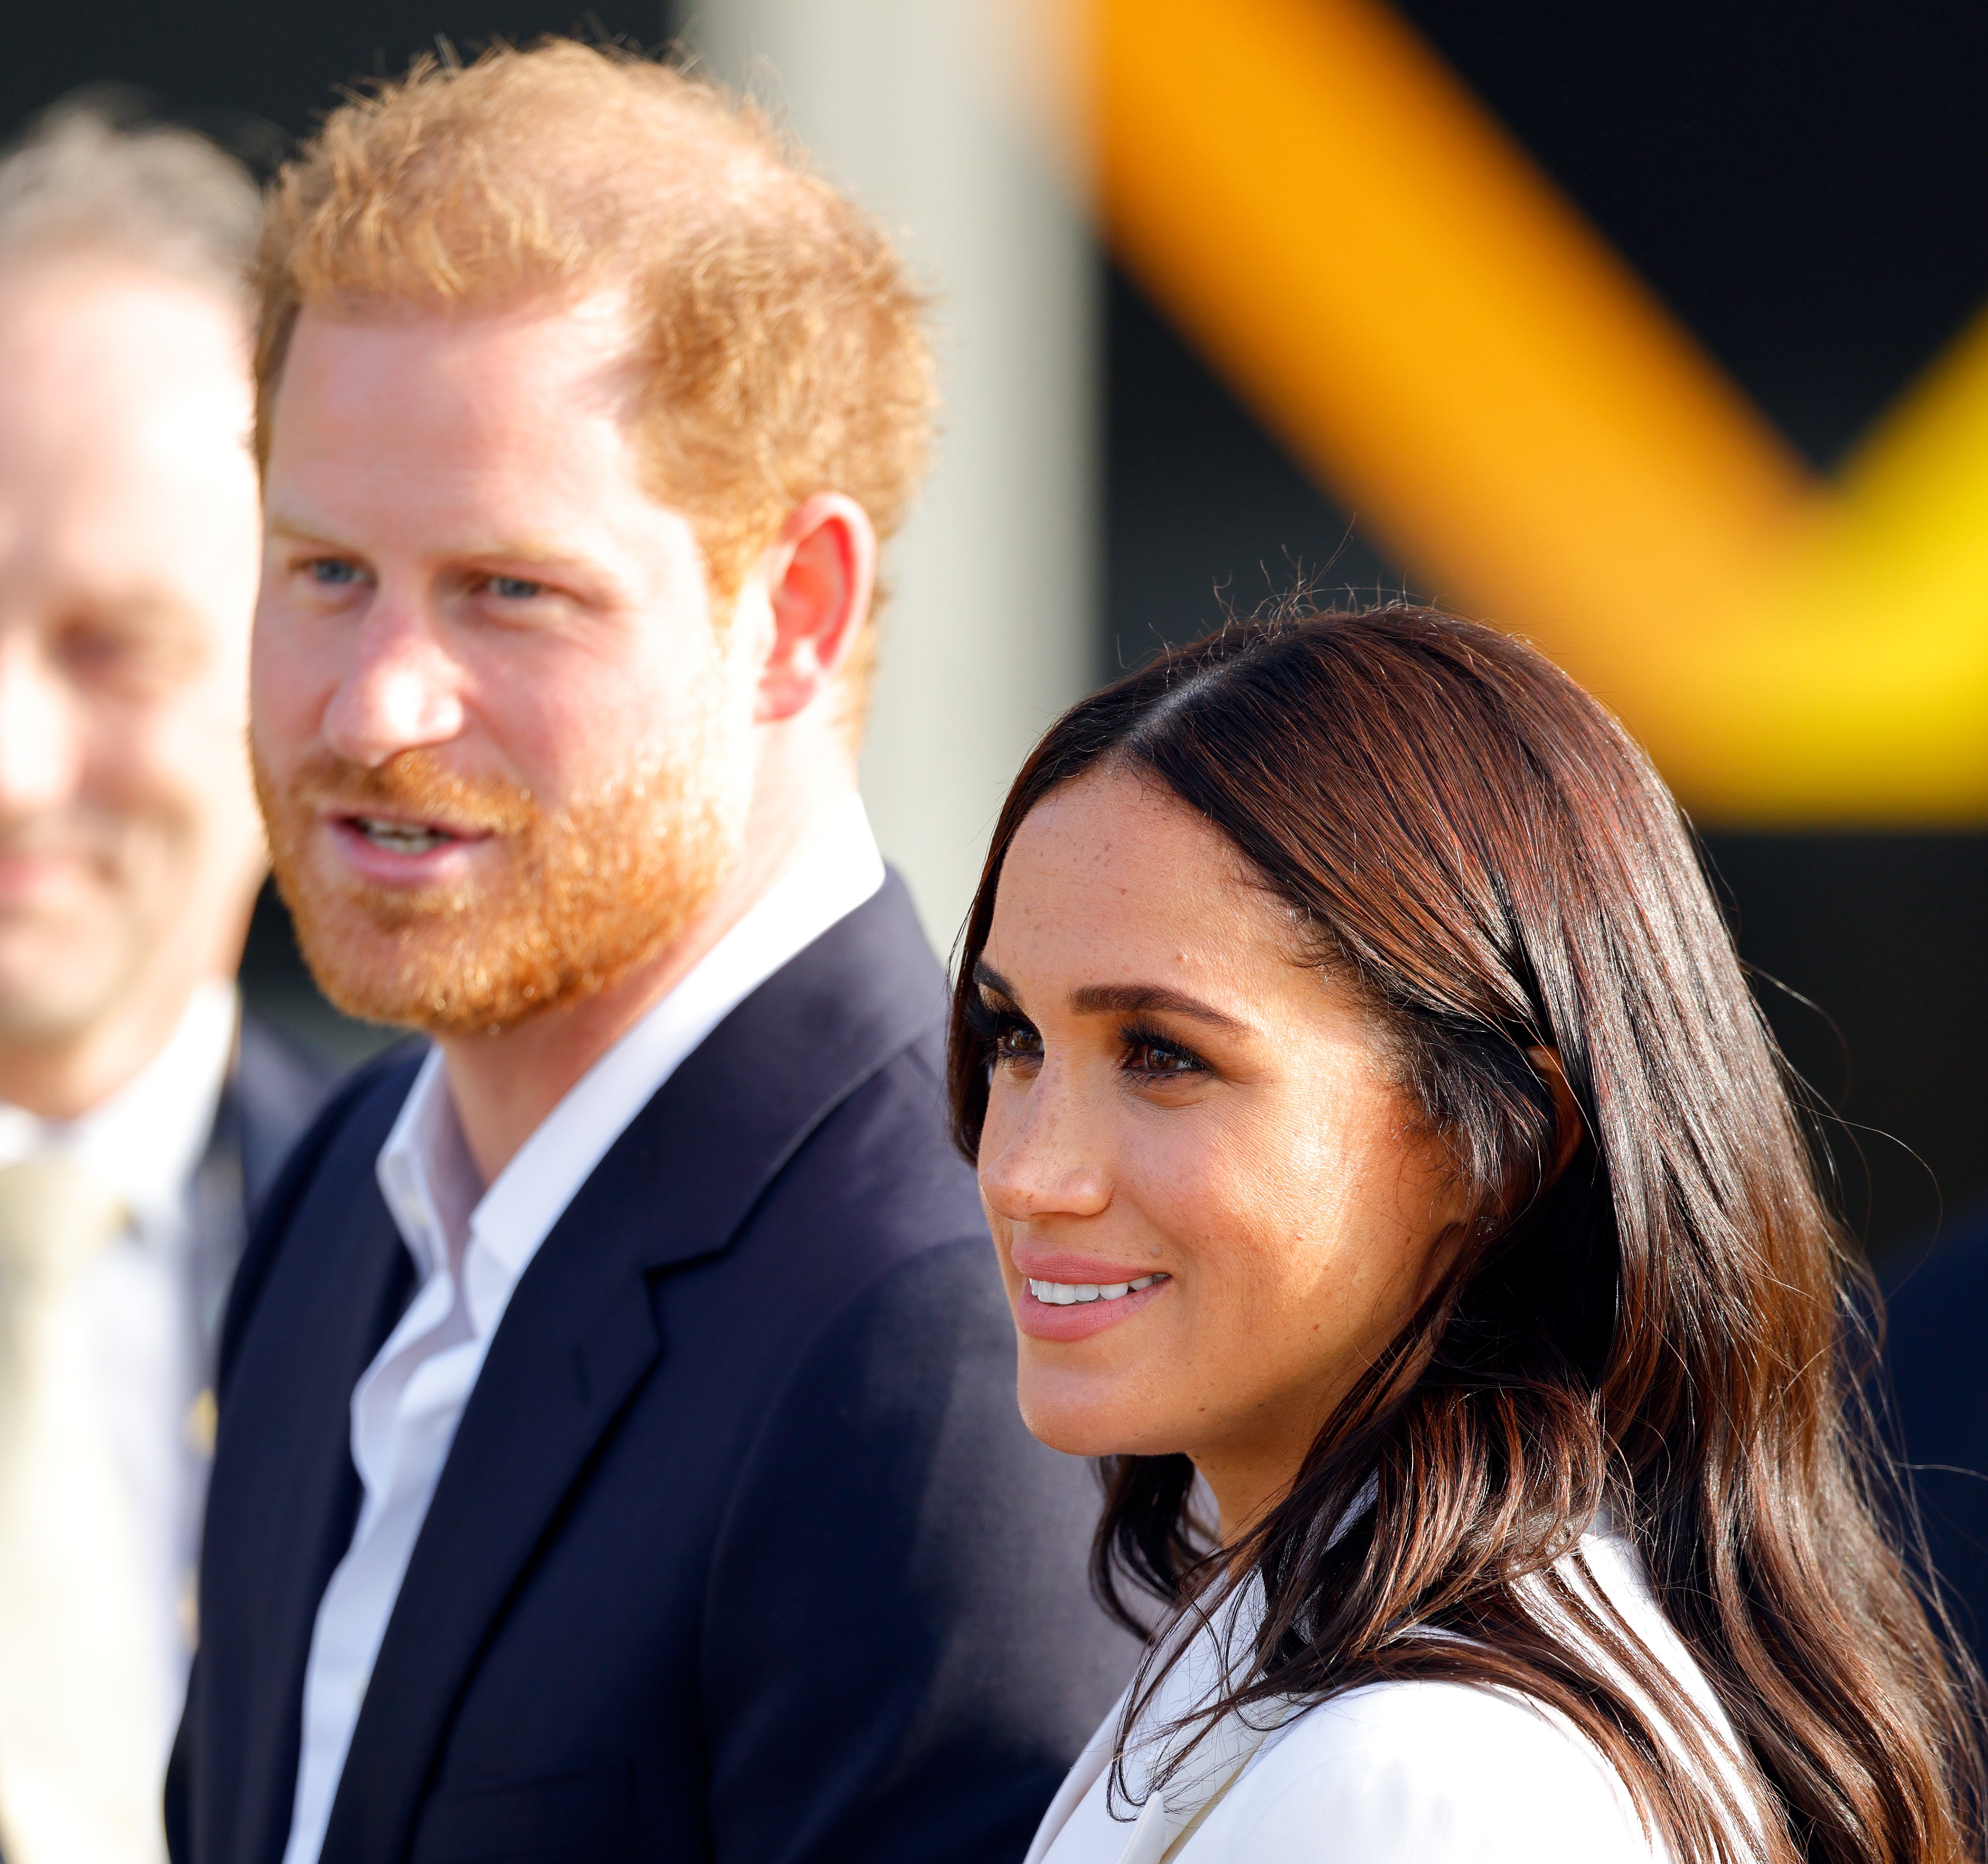 Prince Harry and Meghan Markle attending an Invictus Games Friends and Family reception at Zuiderpark on April 15, 2022 in The Hague, Netherlands. / Source: Getty Images